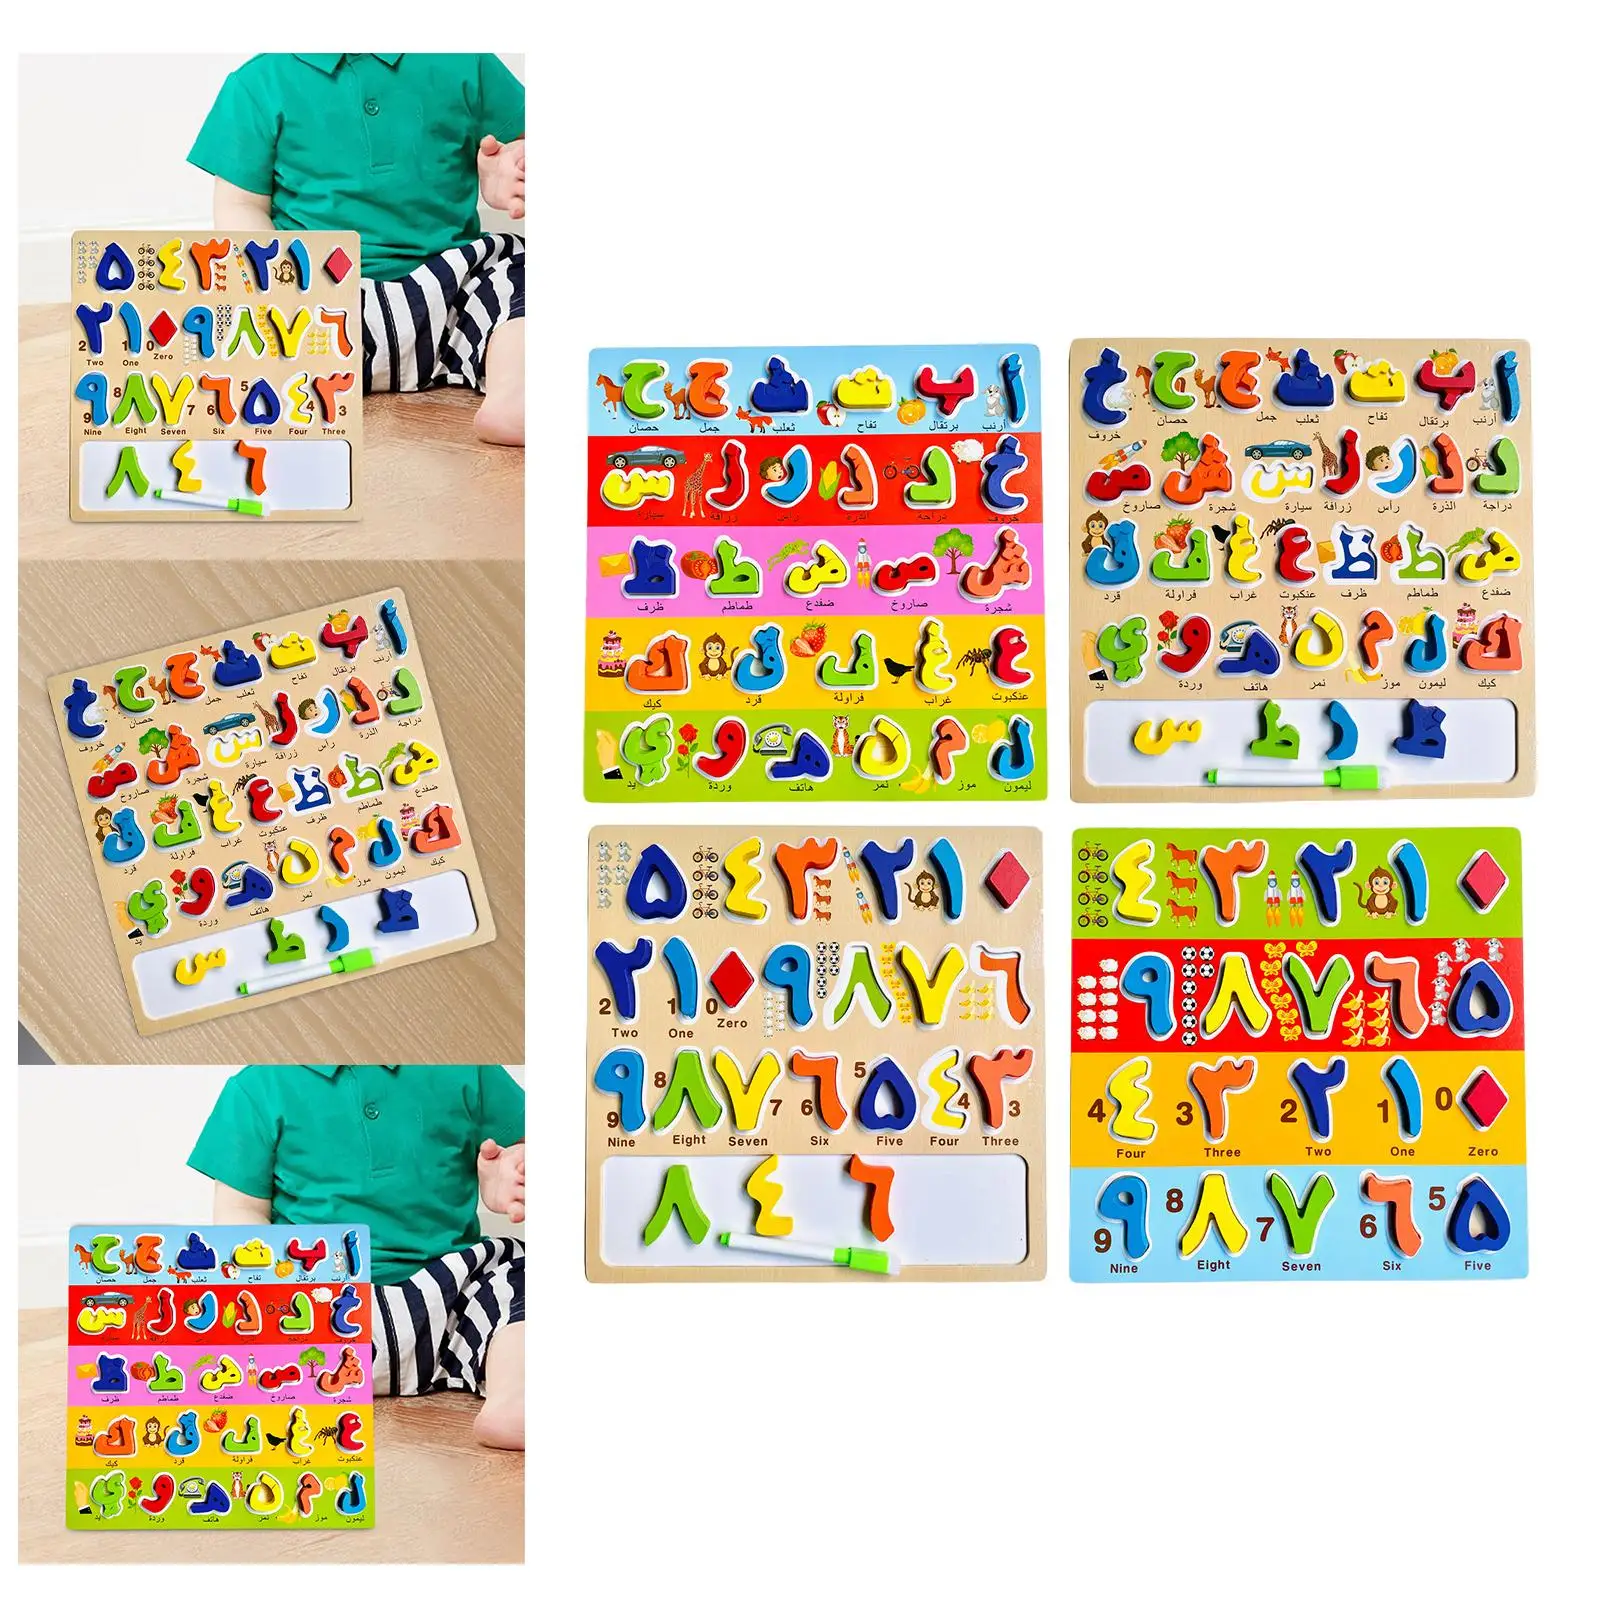 

Wooden Alphabet/Number Bright Color Arabic Puzzle Board for Toddlers Kids Teaching Aids Learning Matching Toy Gifts